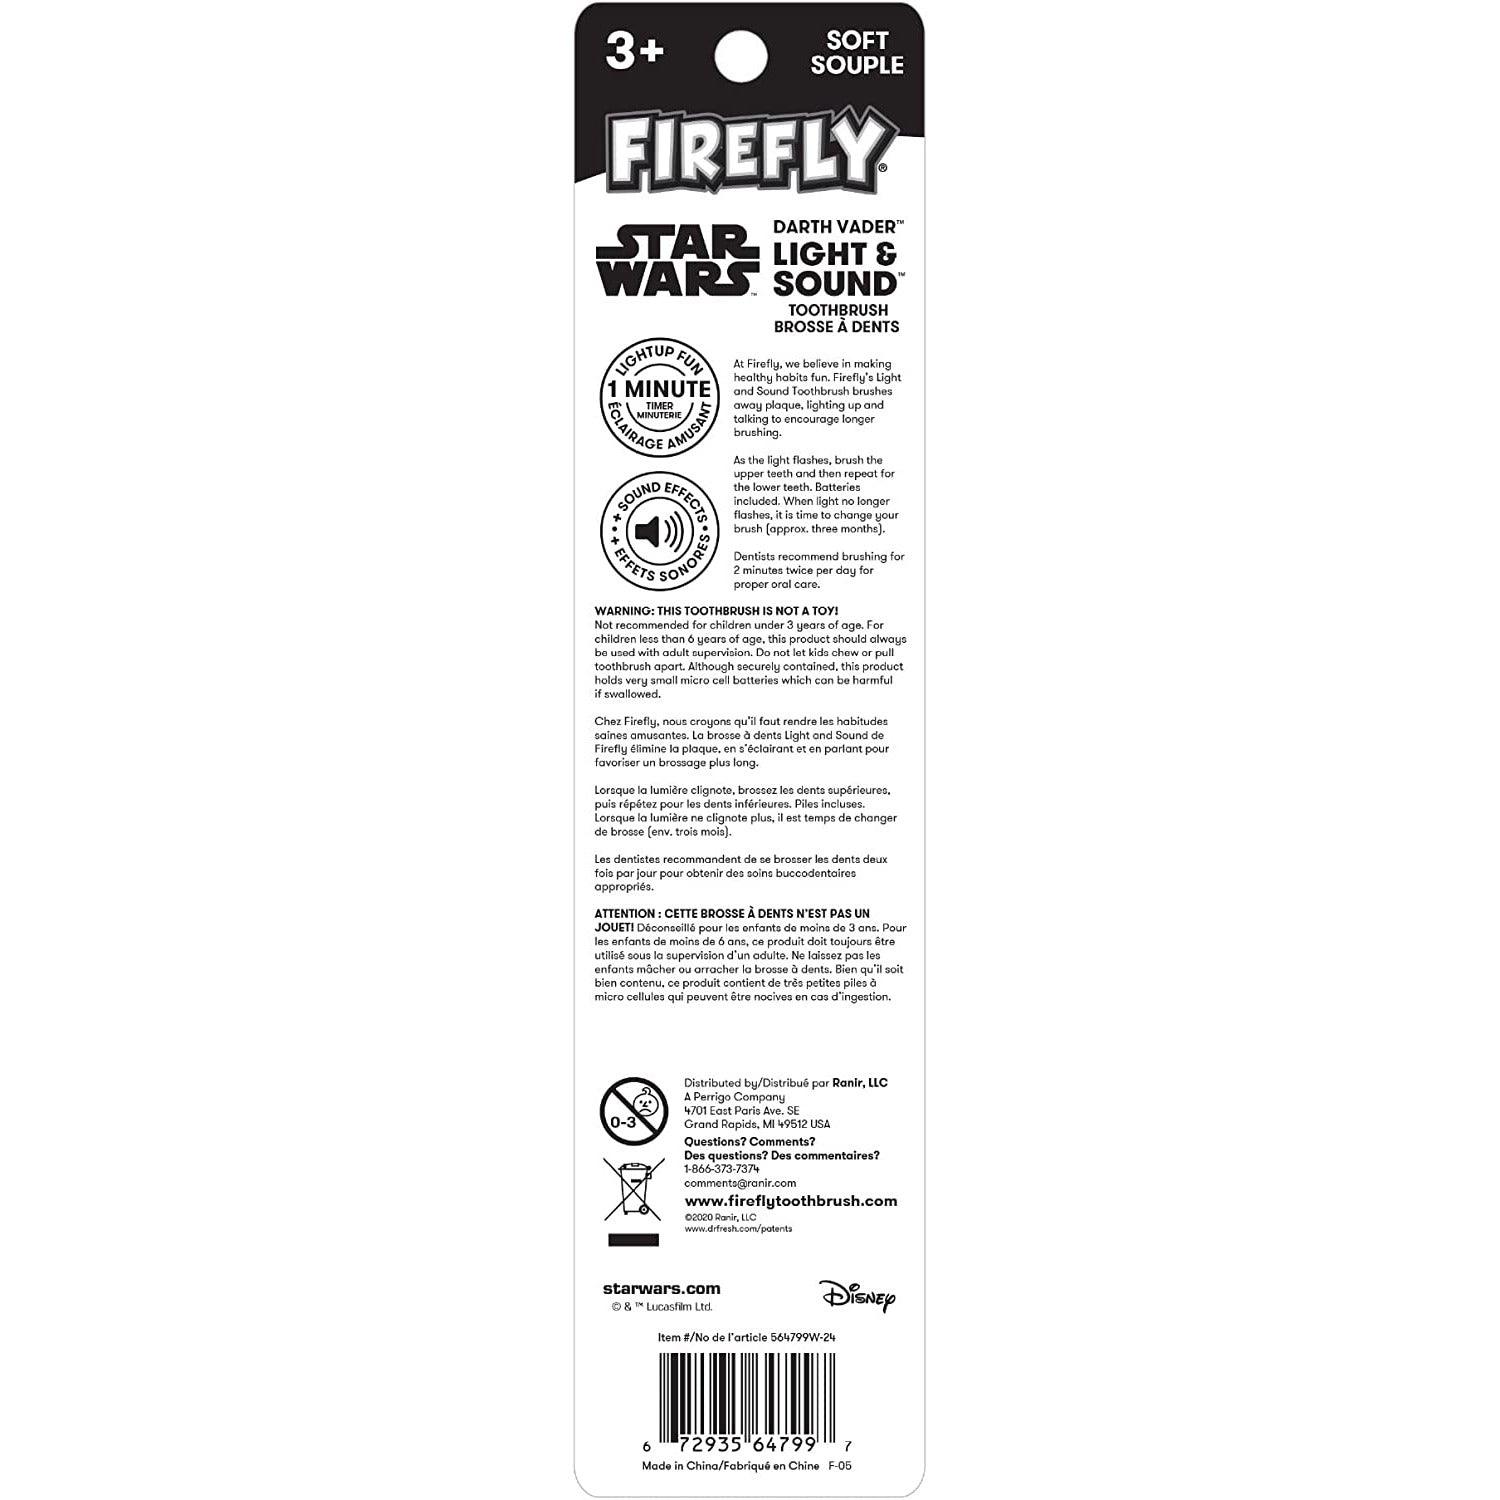 Firefly Clean N' Protect Star Wars Power Toothbrush - Color May Varey - BumbleToys - 5-7 Years, Baby Saftey & Health, Boys, Girls, Pre-Order, star wars, Toothbrush